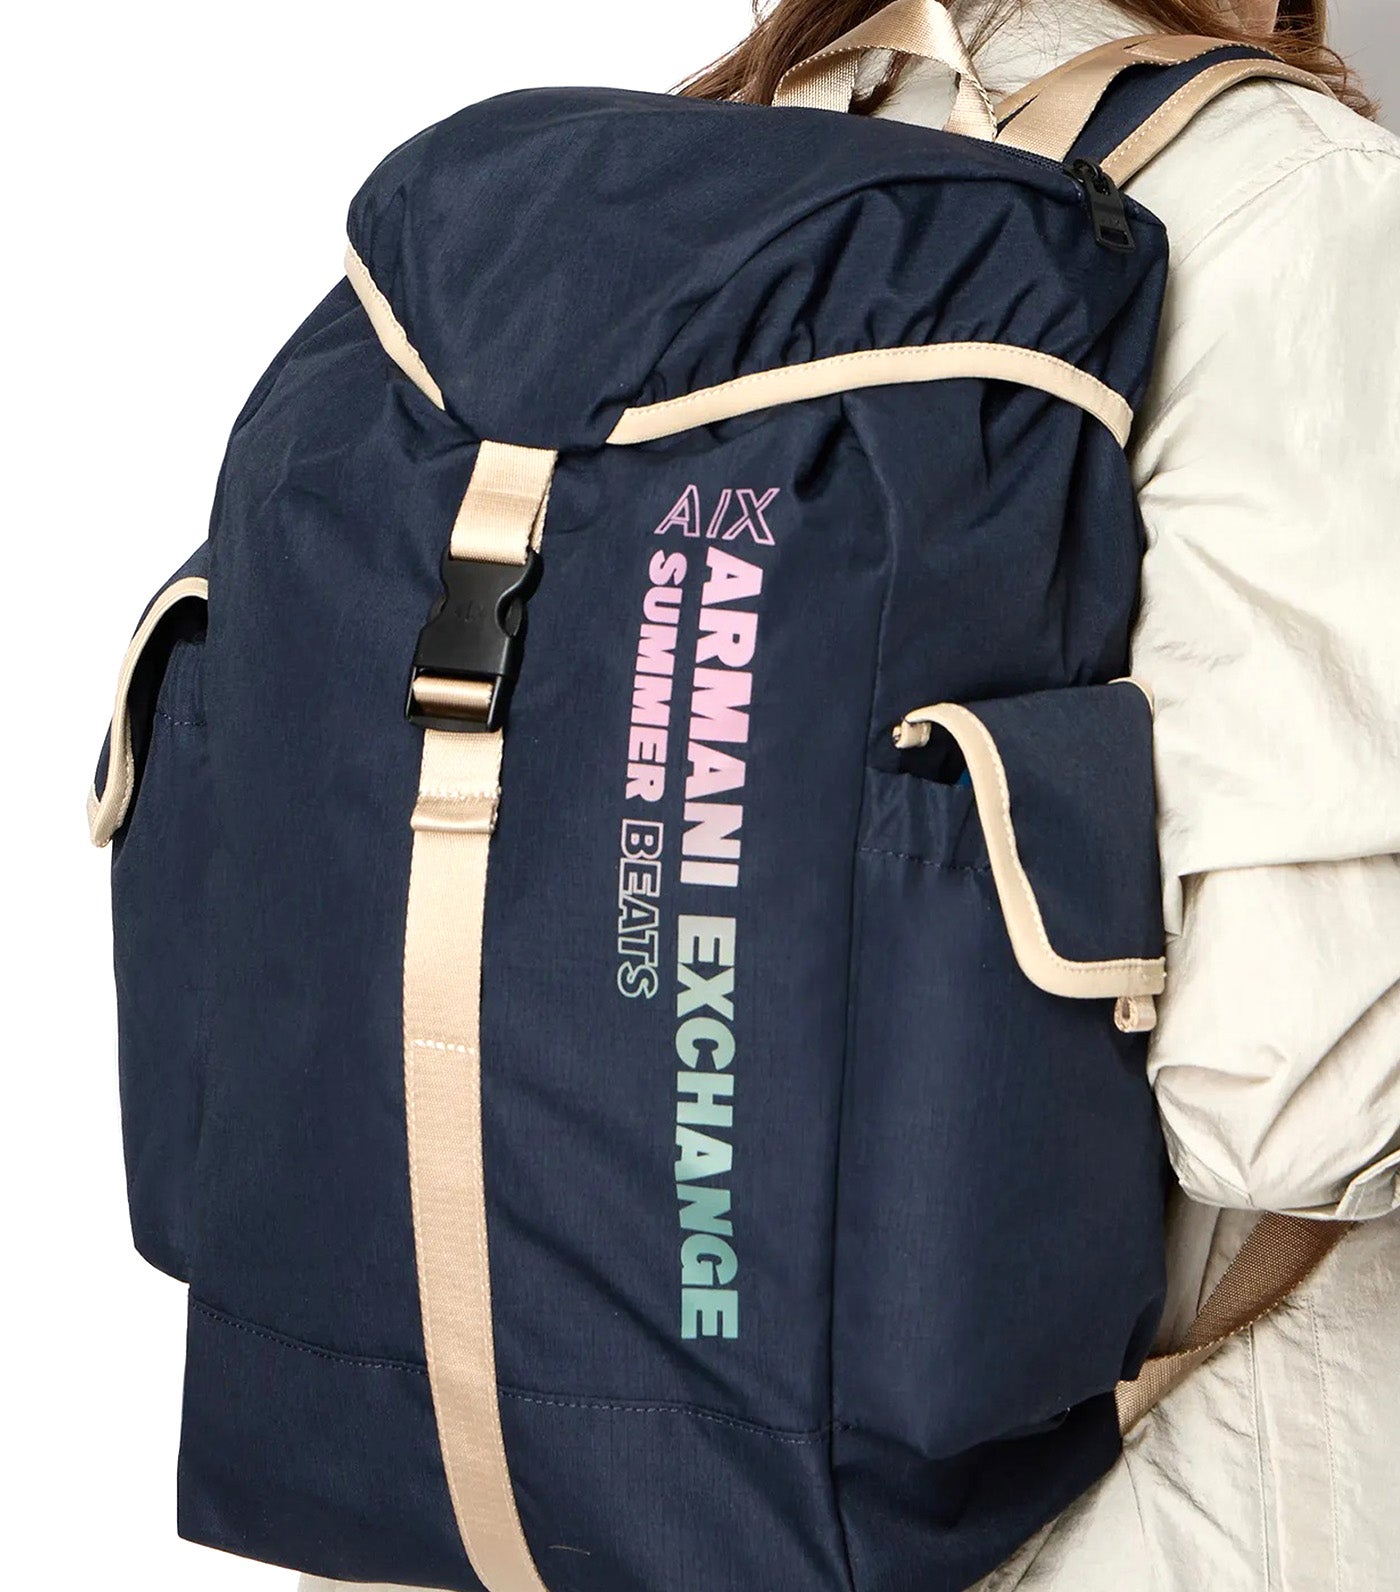 Recycled Fabric Backpack Blue Navy